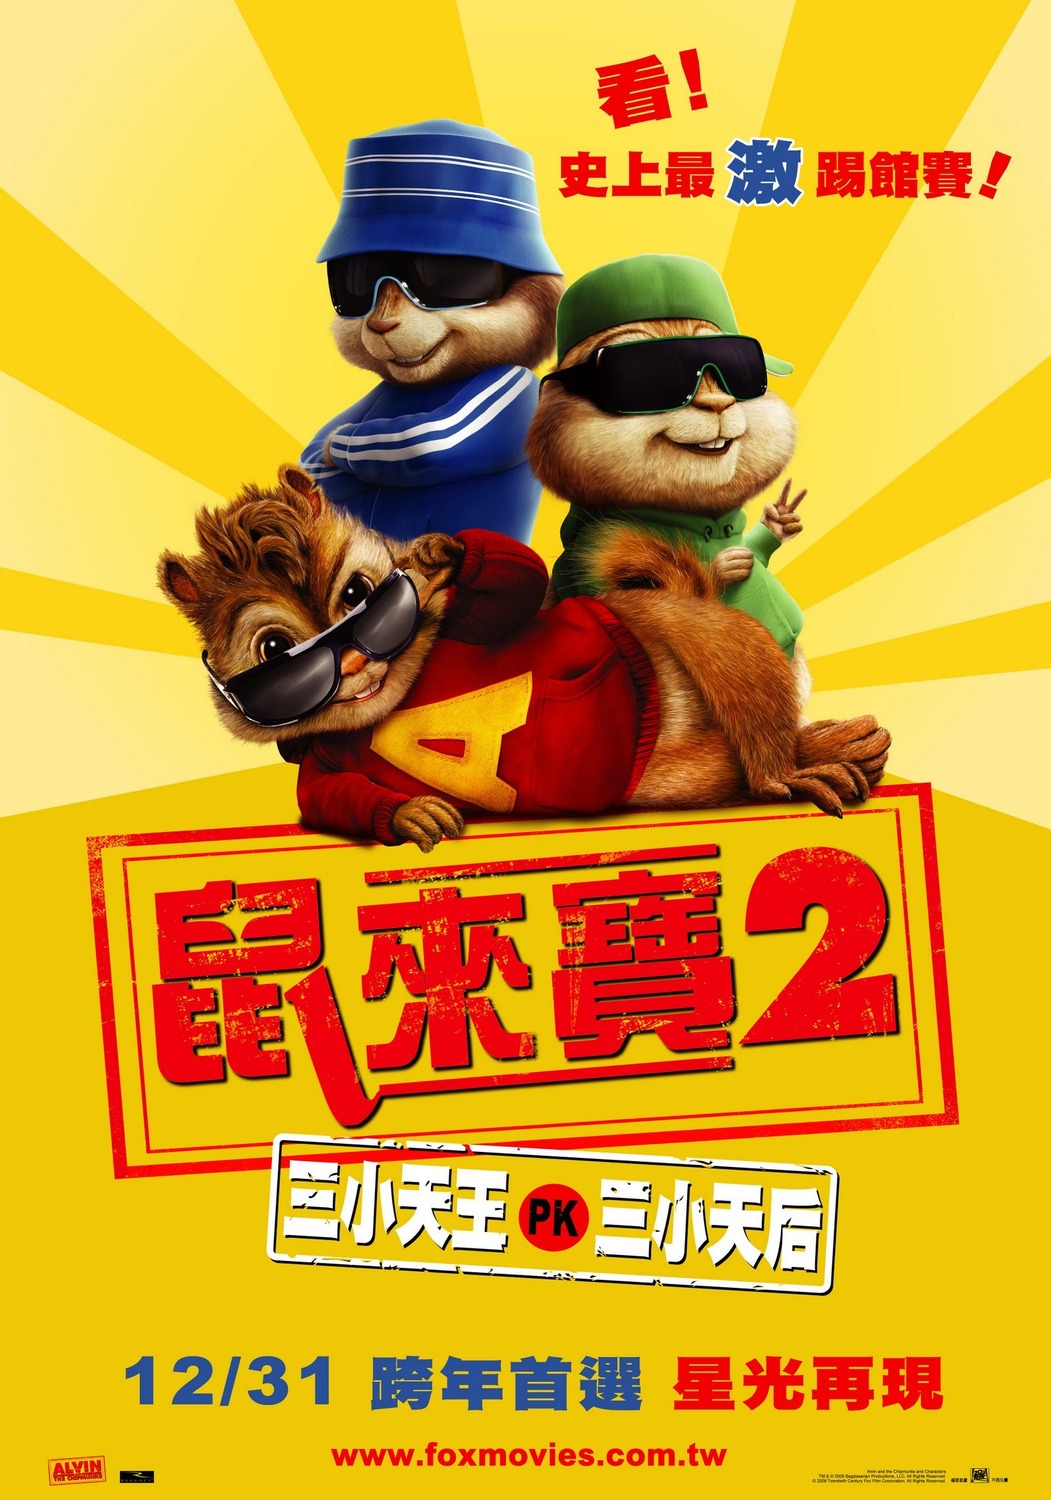 Extra Large Movie Poster Image for Alvin and the Chipmunks: The Squeakquel (#4 of 14)